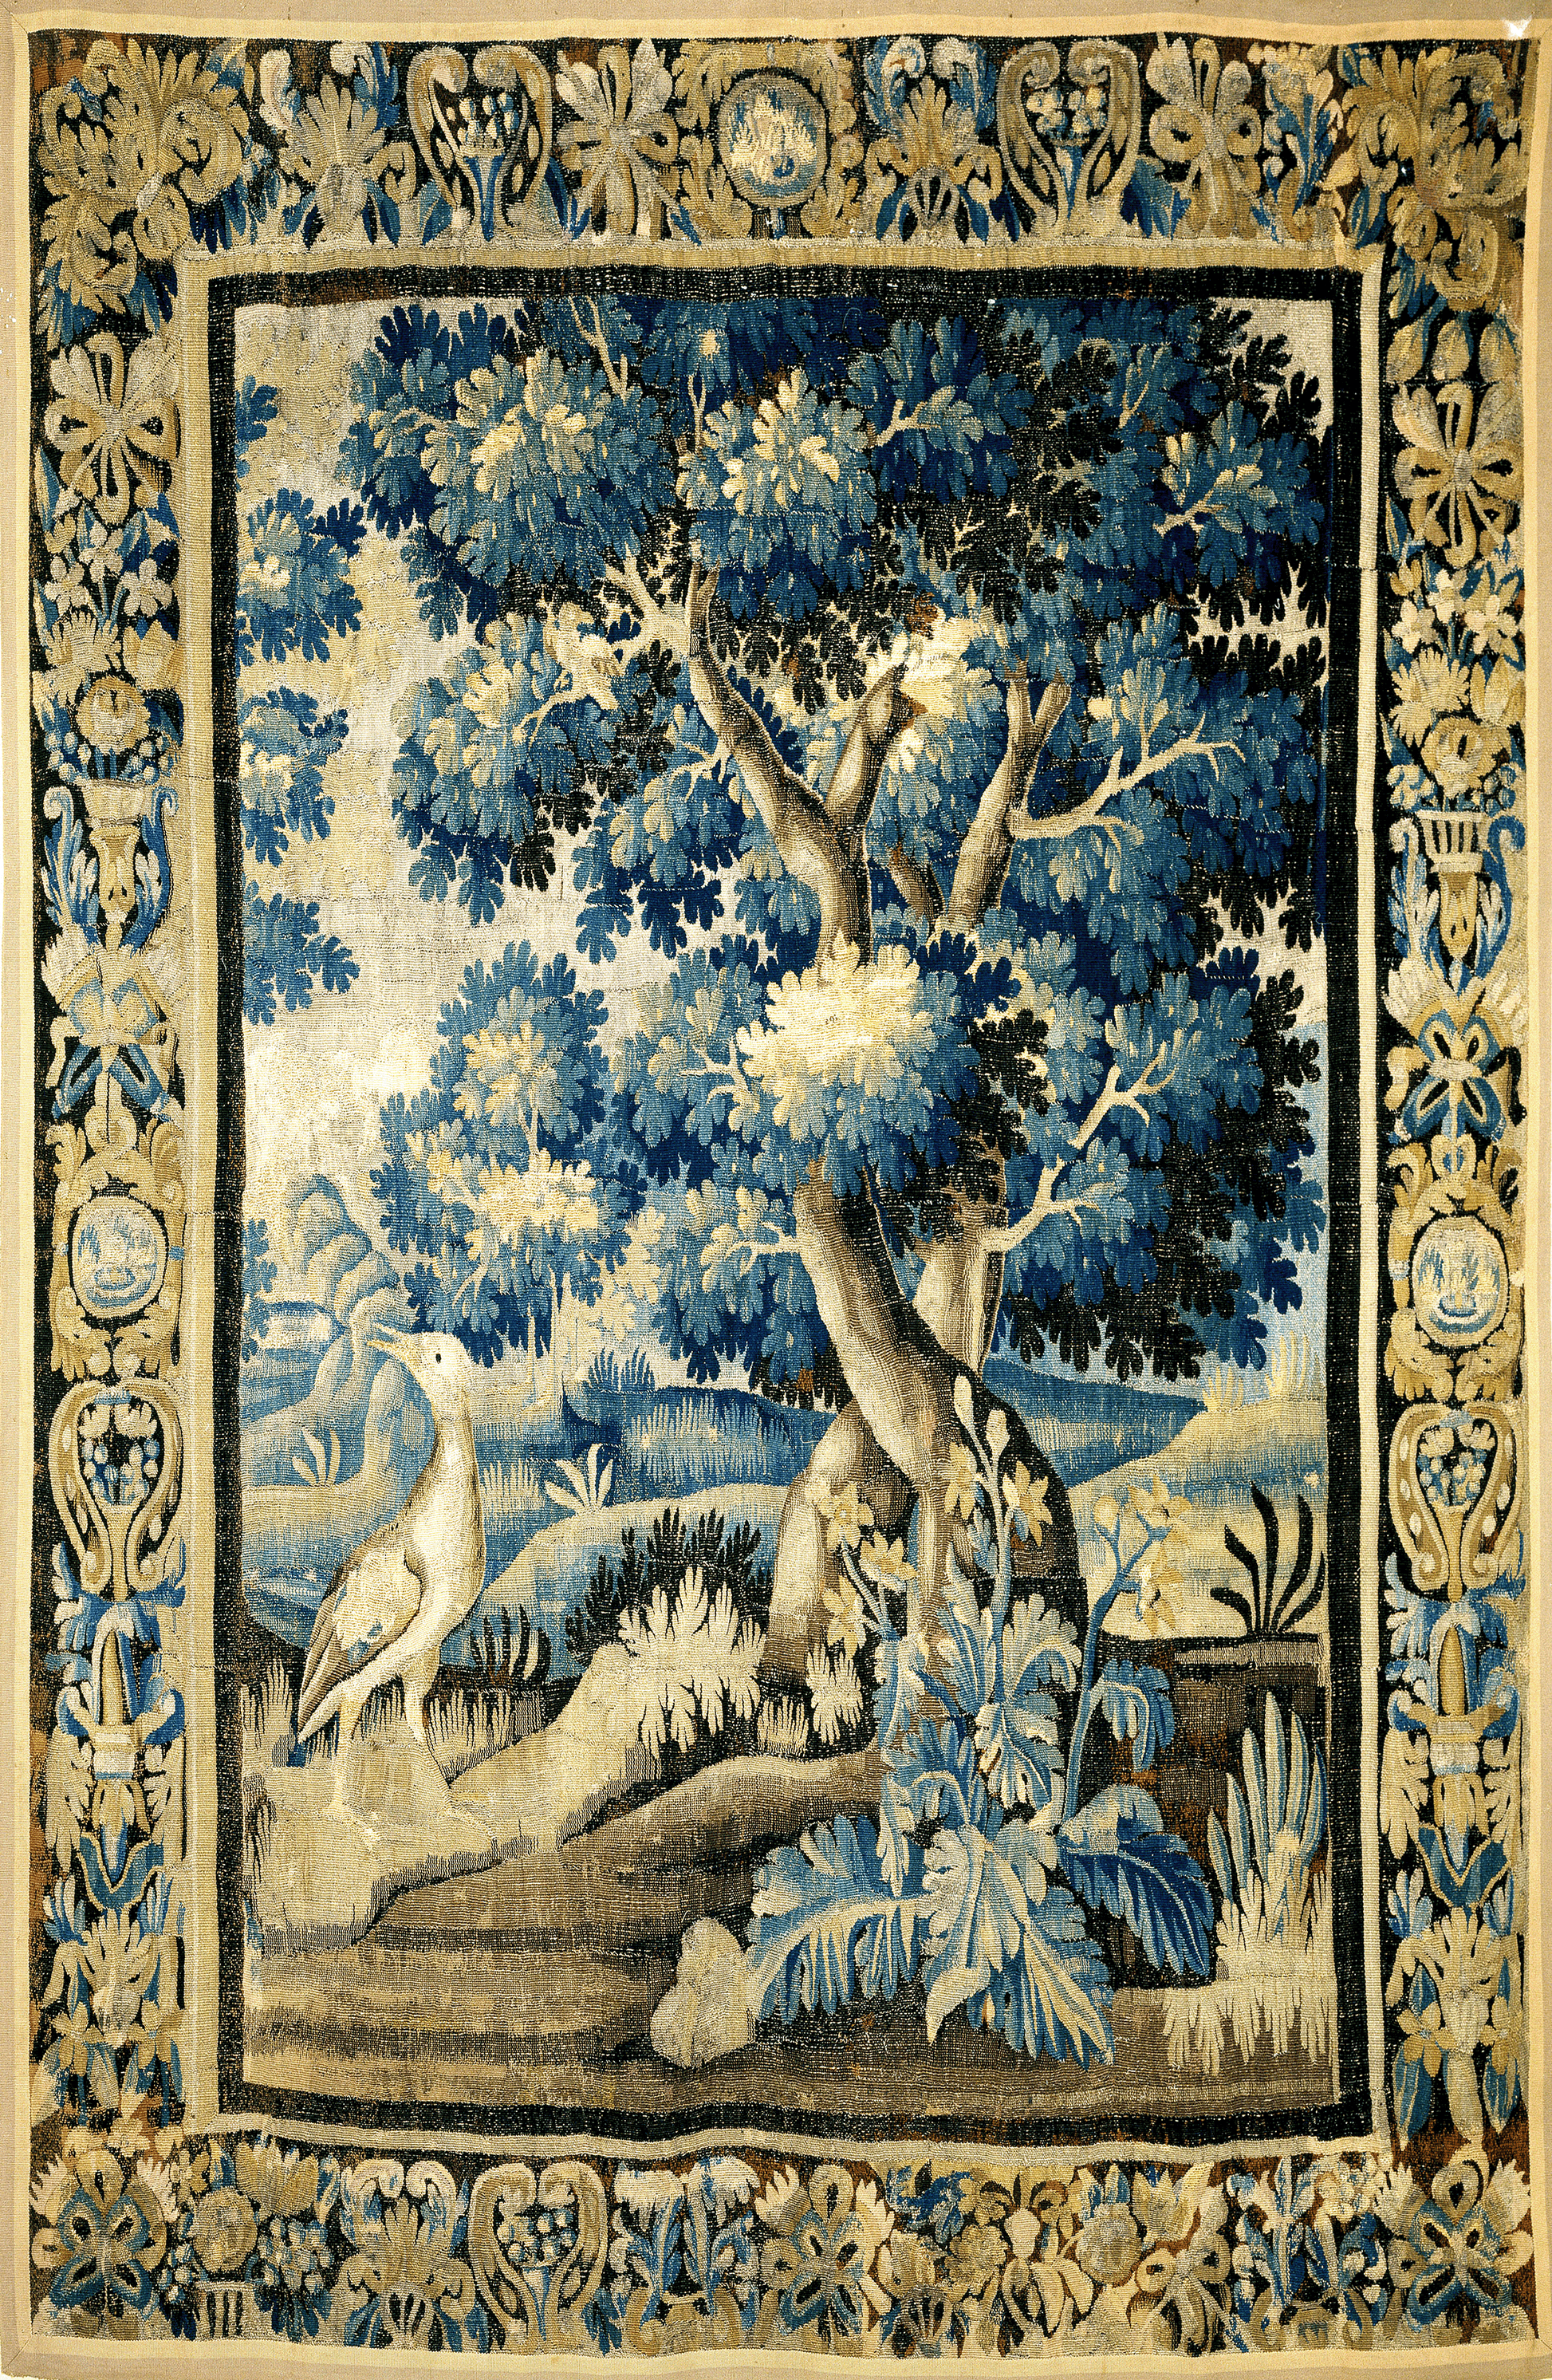 A richly detailed 17th-century verdure tapestry, depicting a lush forest scene with towering trees, vibrant foliage, and delicate wildlife. Sunlight filters through the dense canopy, casting dappled shadows on the forest floor. The tapestry exudes a sense of tranquility and natural beauty, inviting viewers to immerse themselves in its timeless allure.